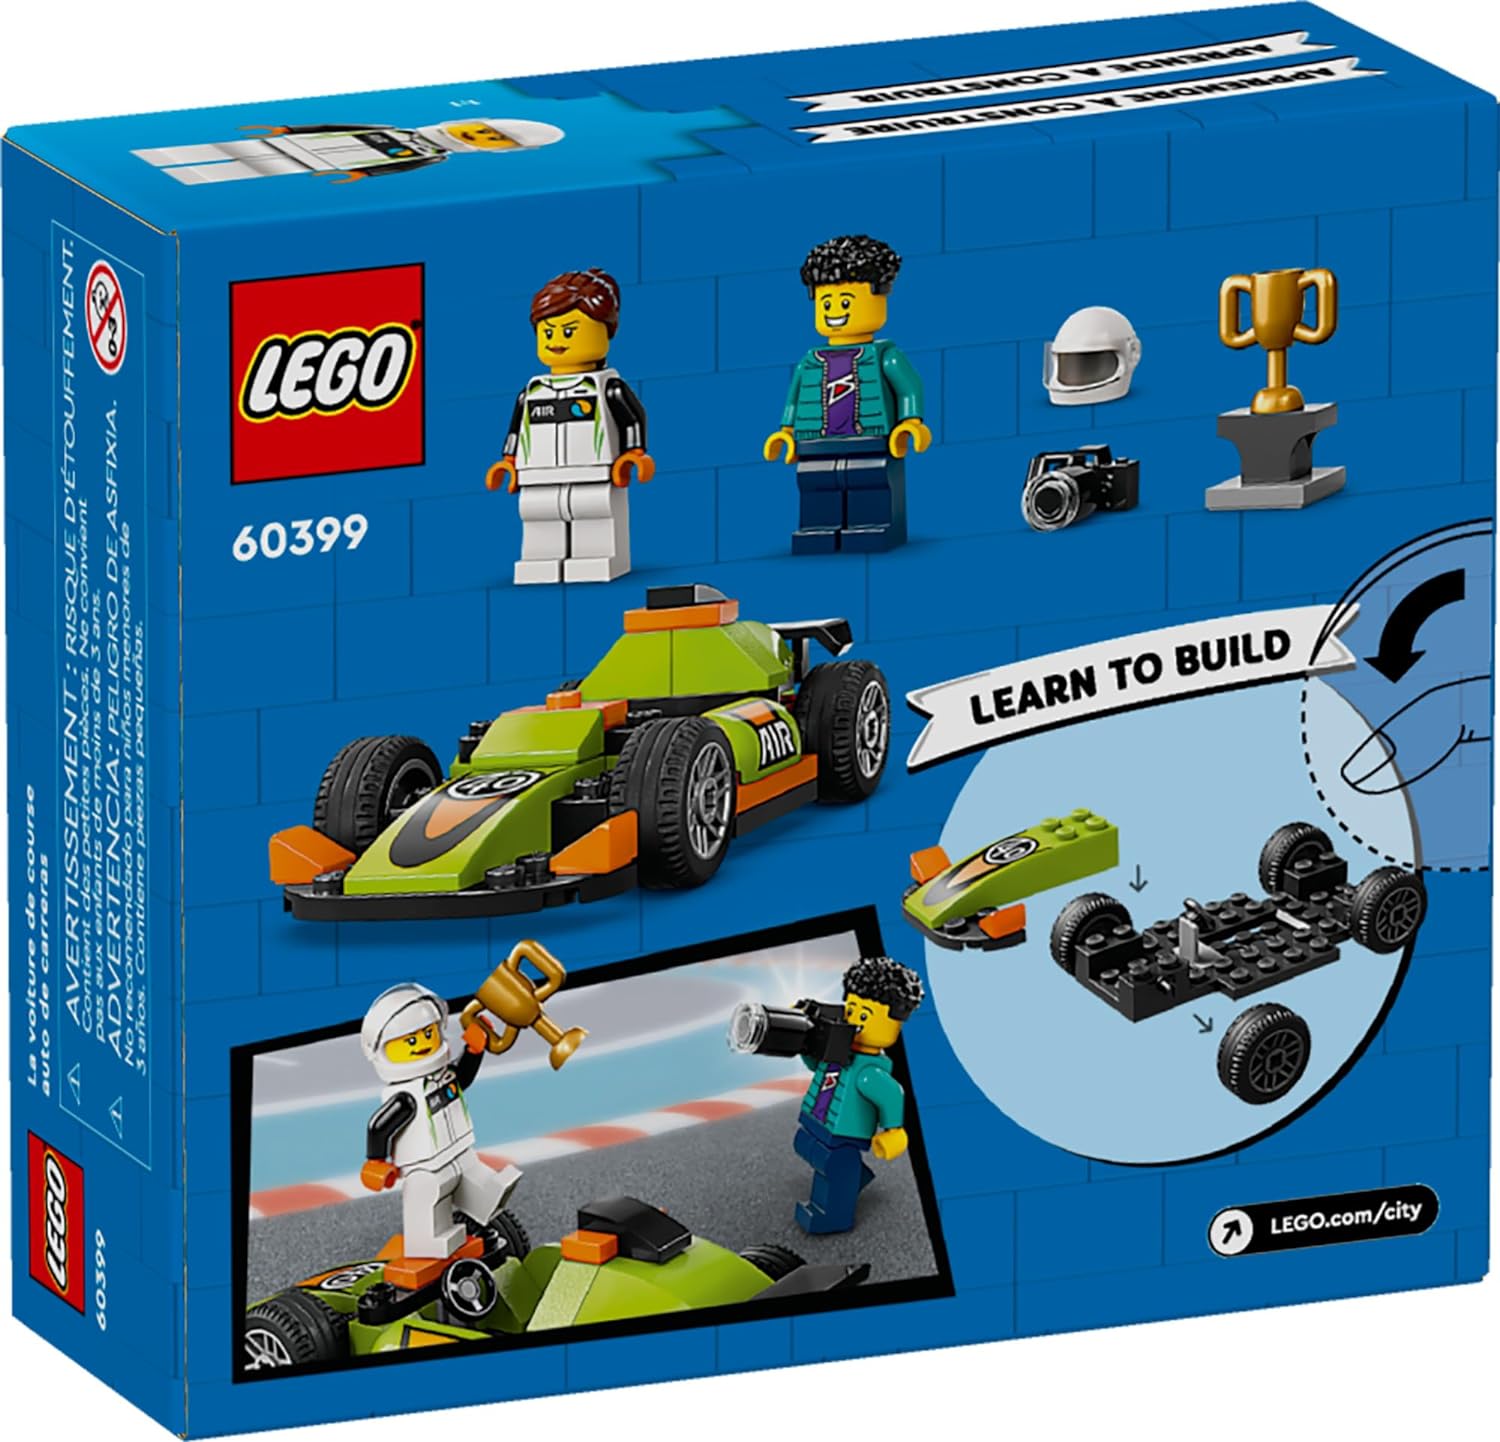 LEGO City Green Race Car Toy 60399, Classic-Style Racing Vehicle